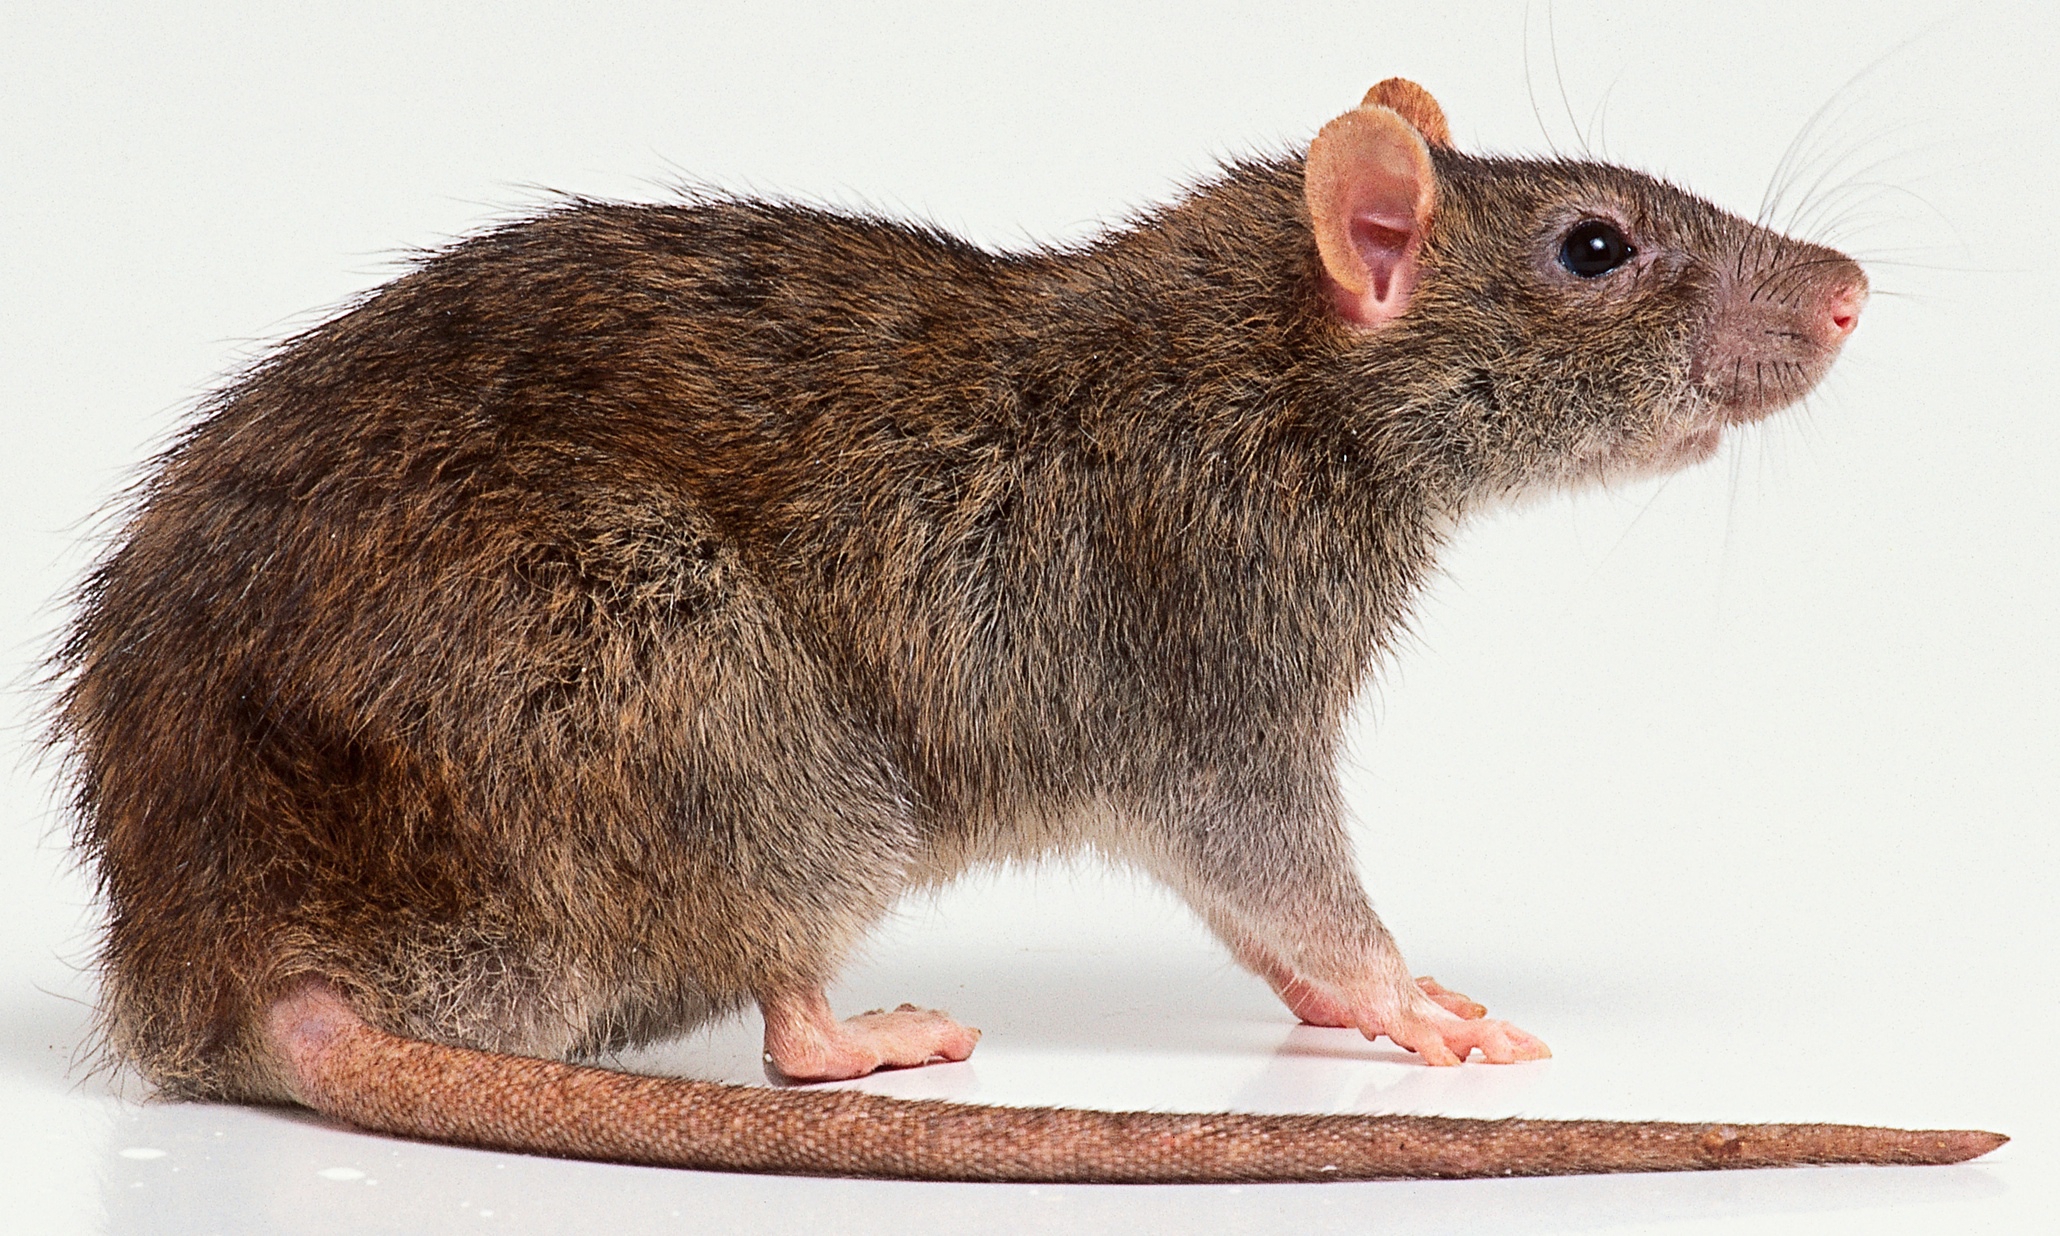 Rat Wallpapers Images Photos Pictures Backgrounds